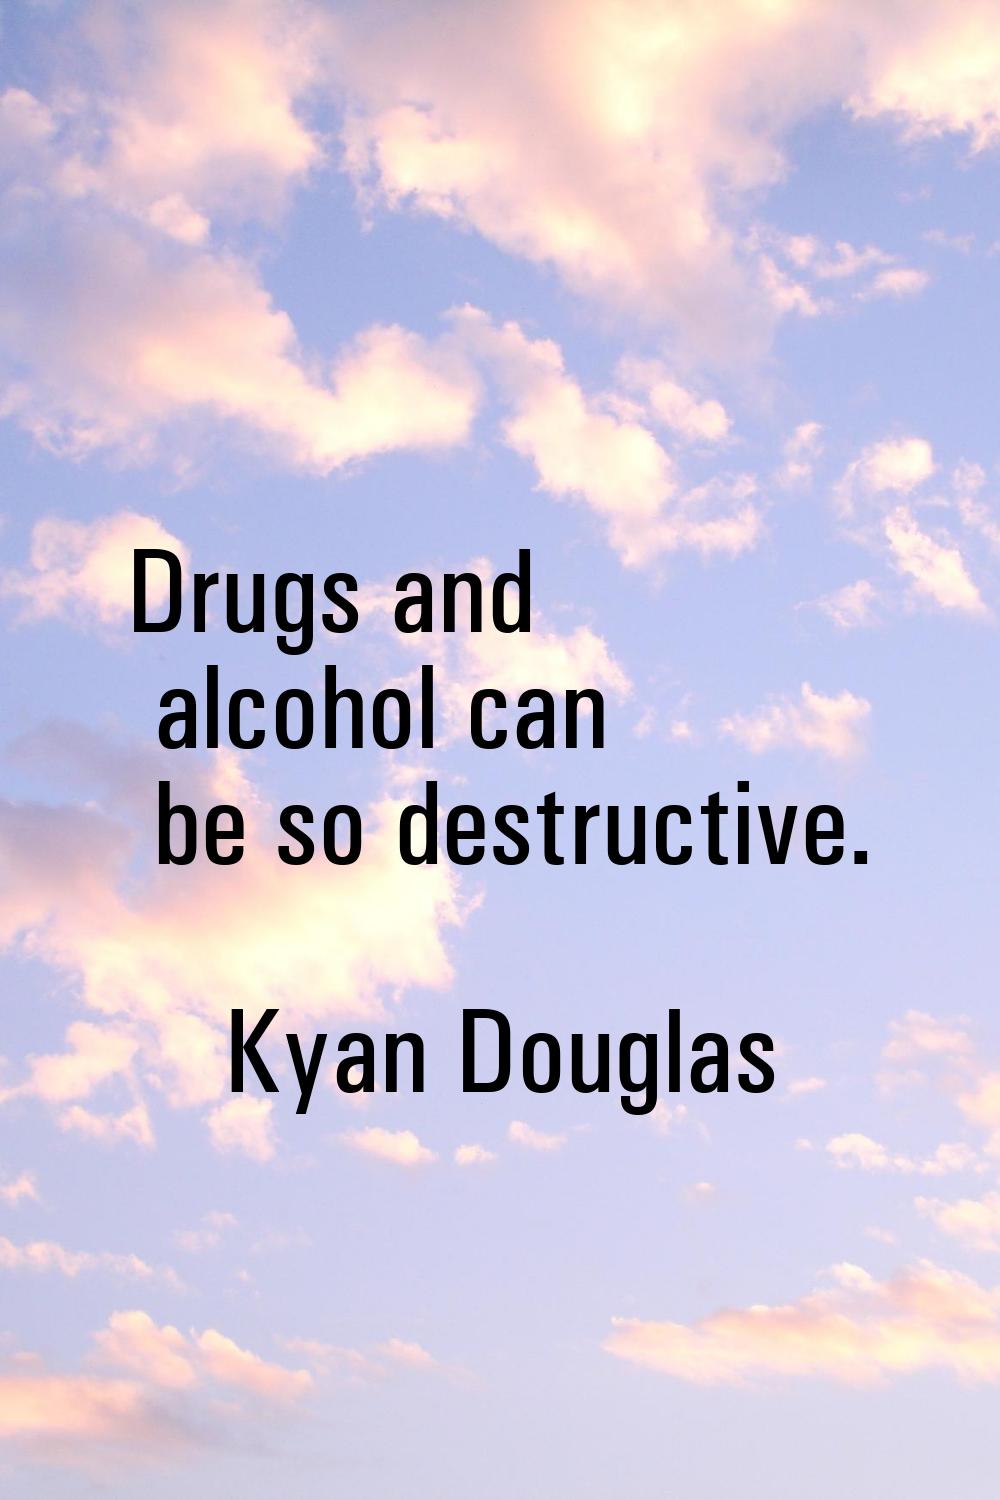 Drugs and alcohol can be so destructive.